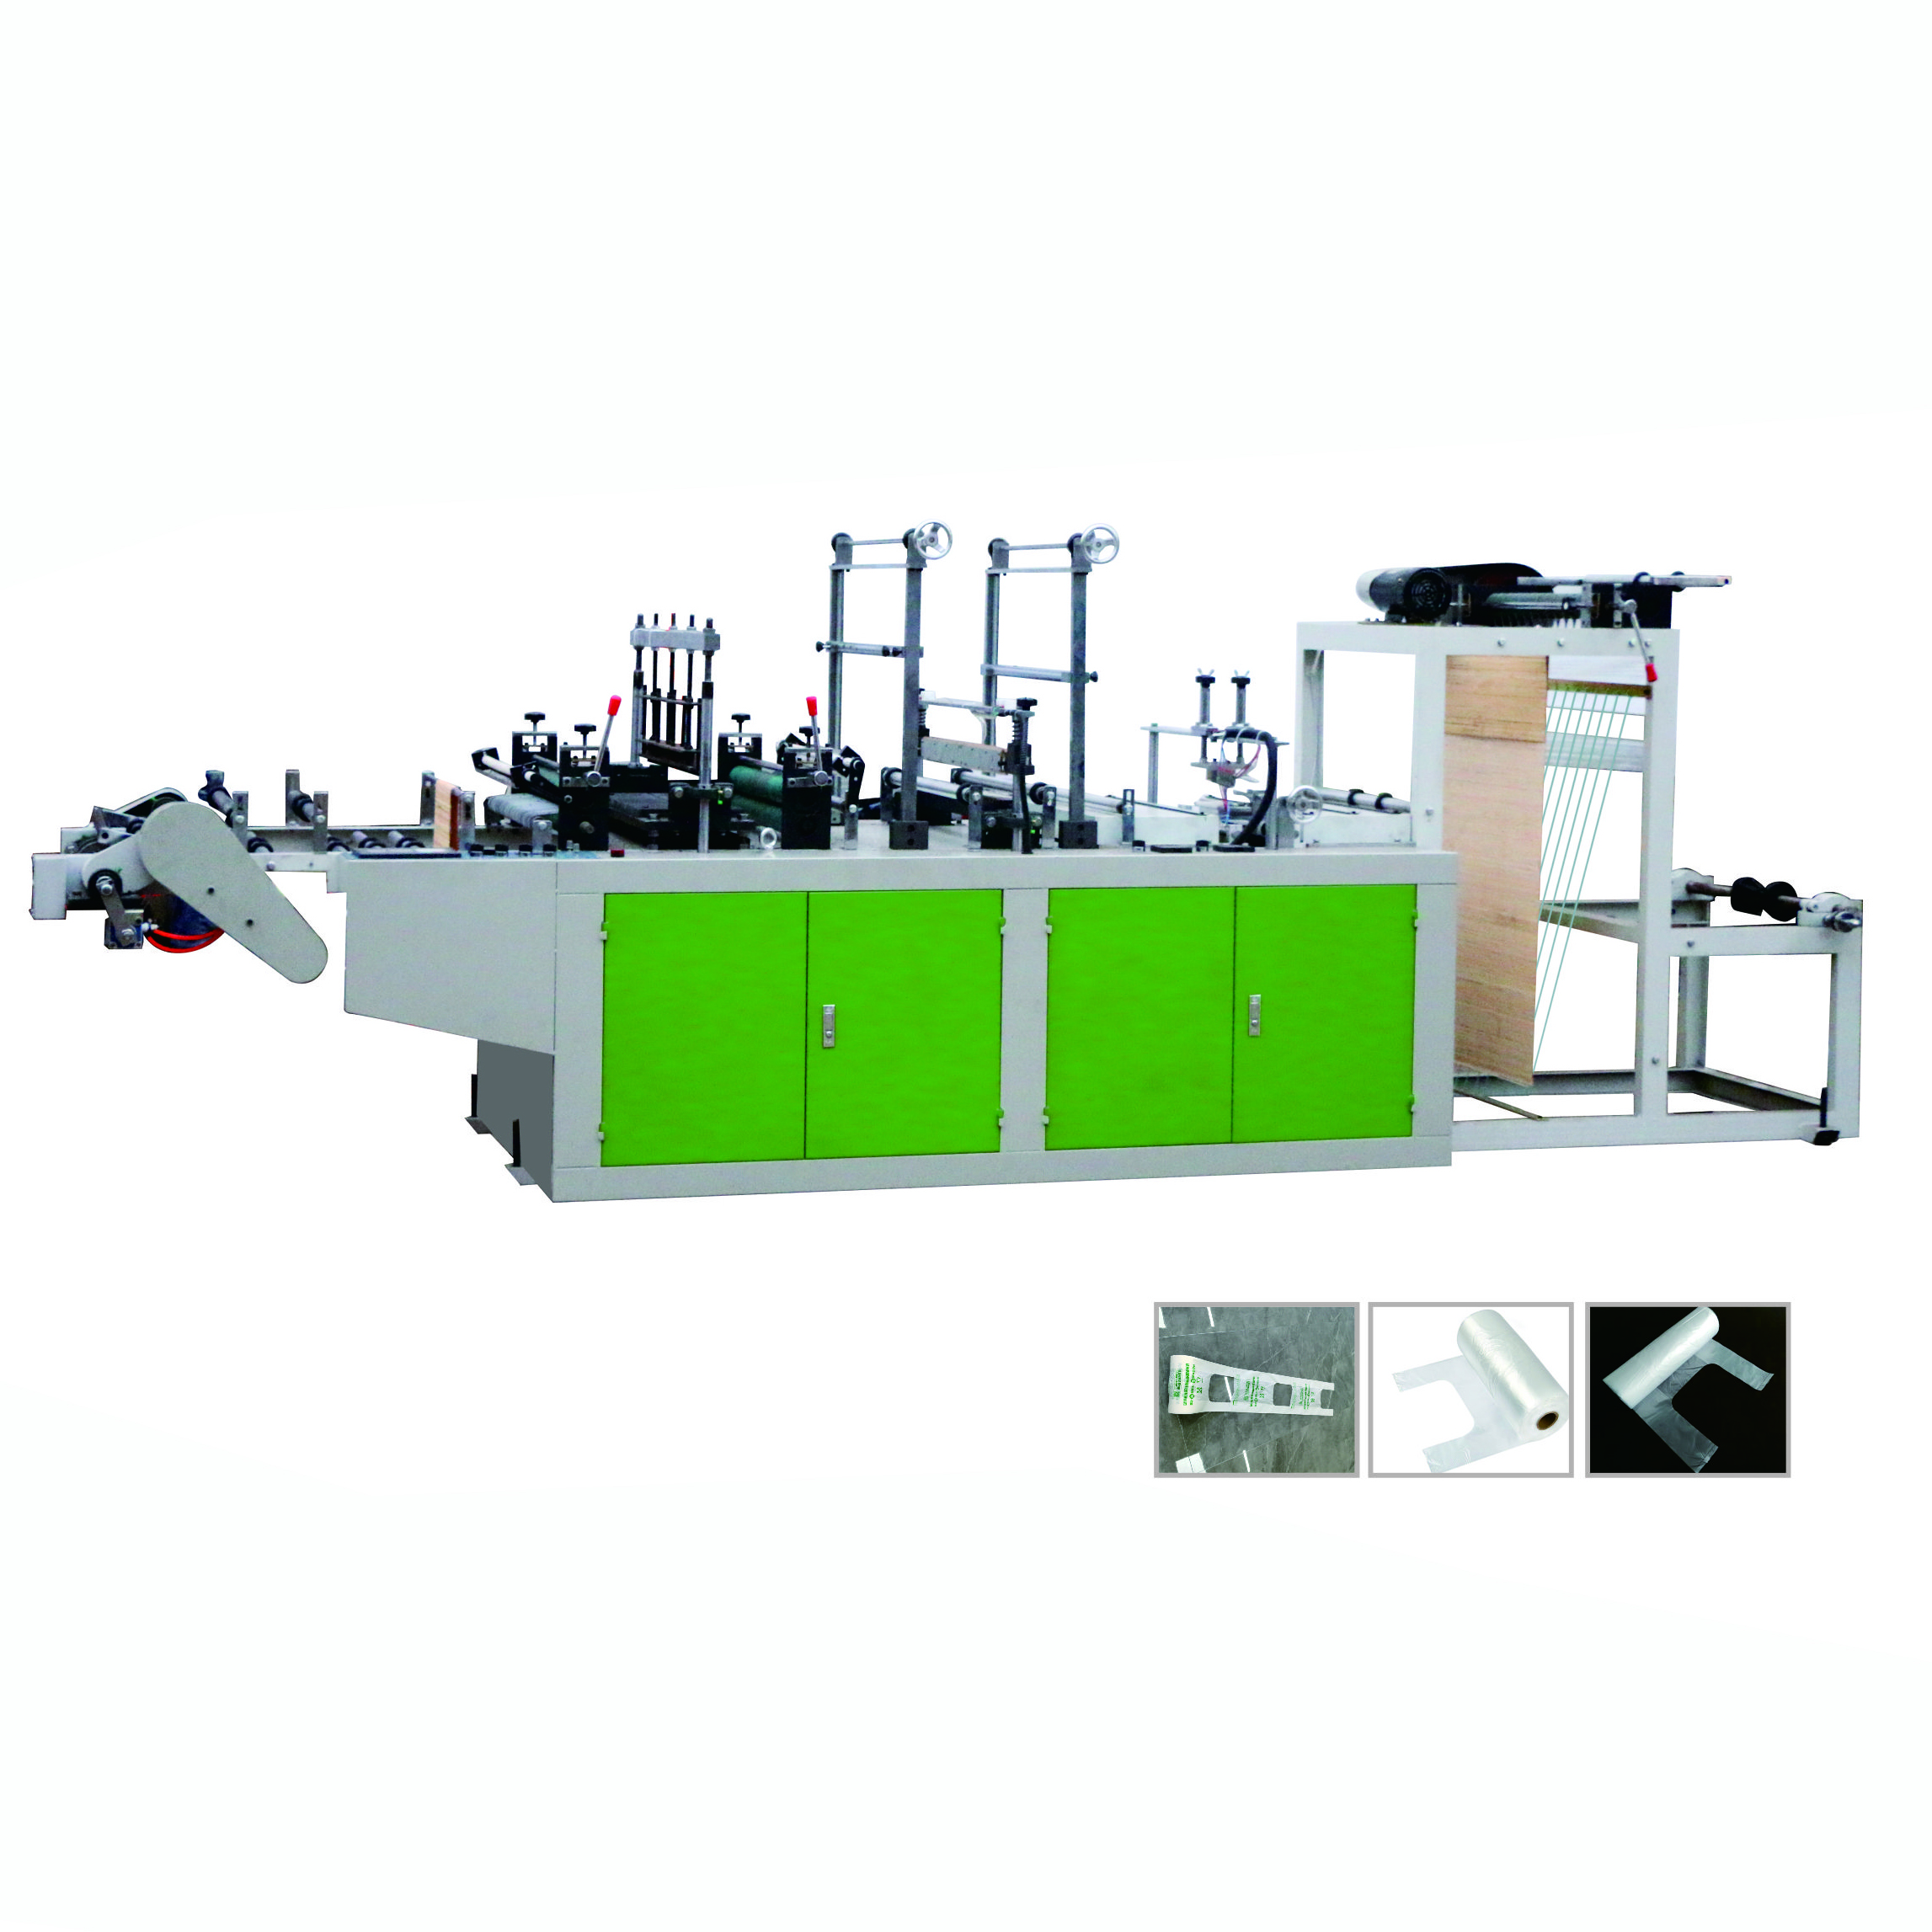 SF-D Series Continuous-rolled Vest Bag Making Machine（Two Servo Motors）